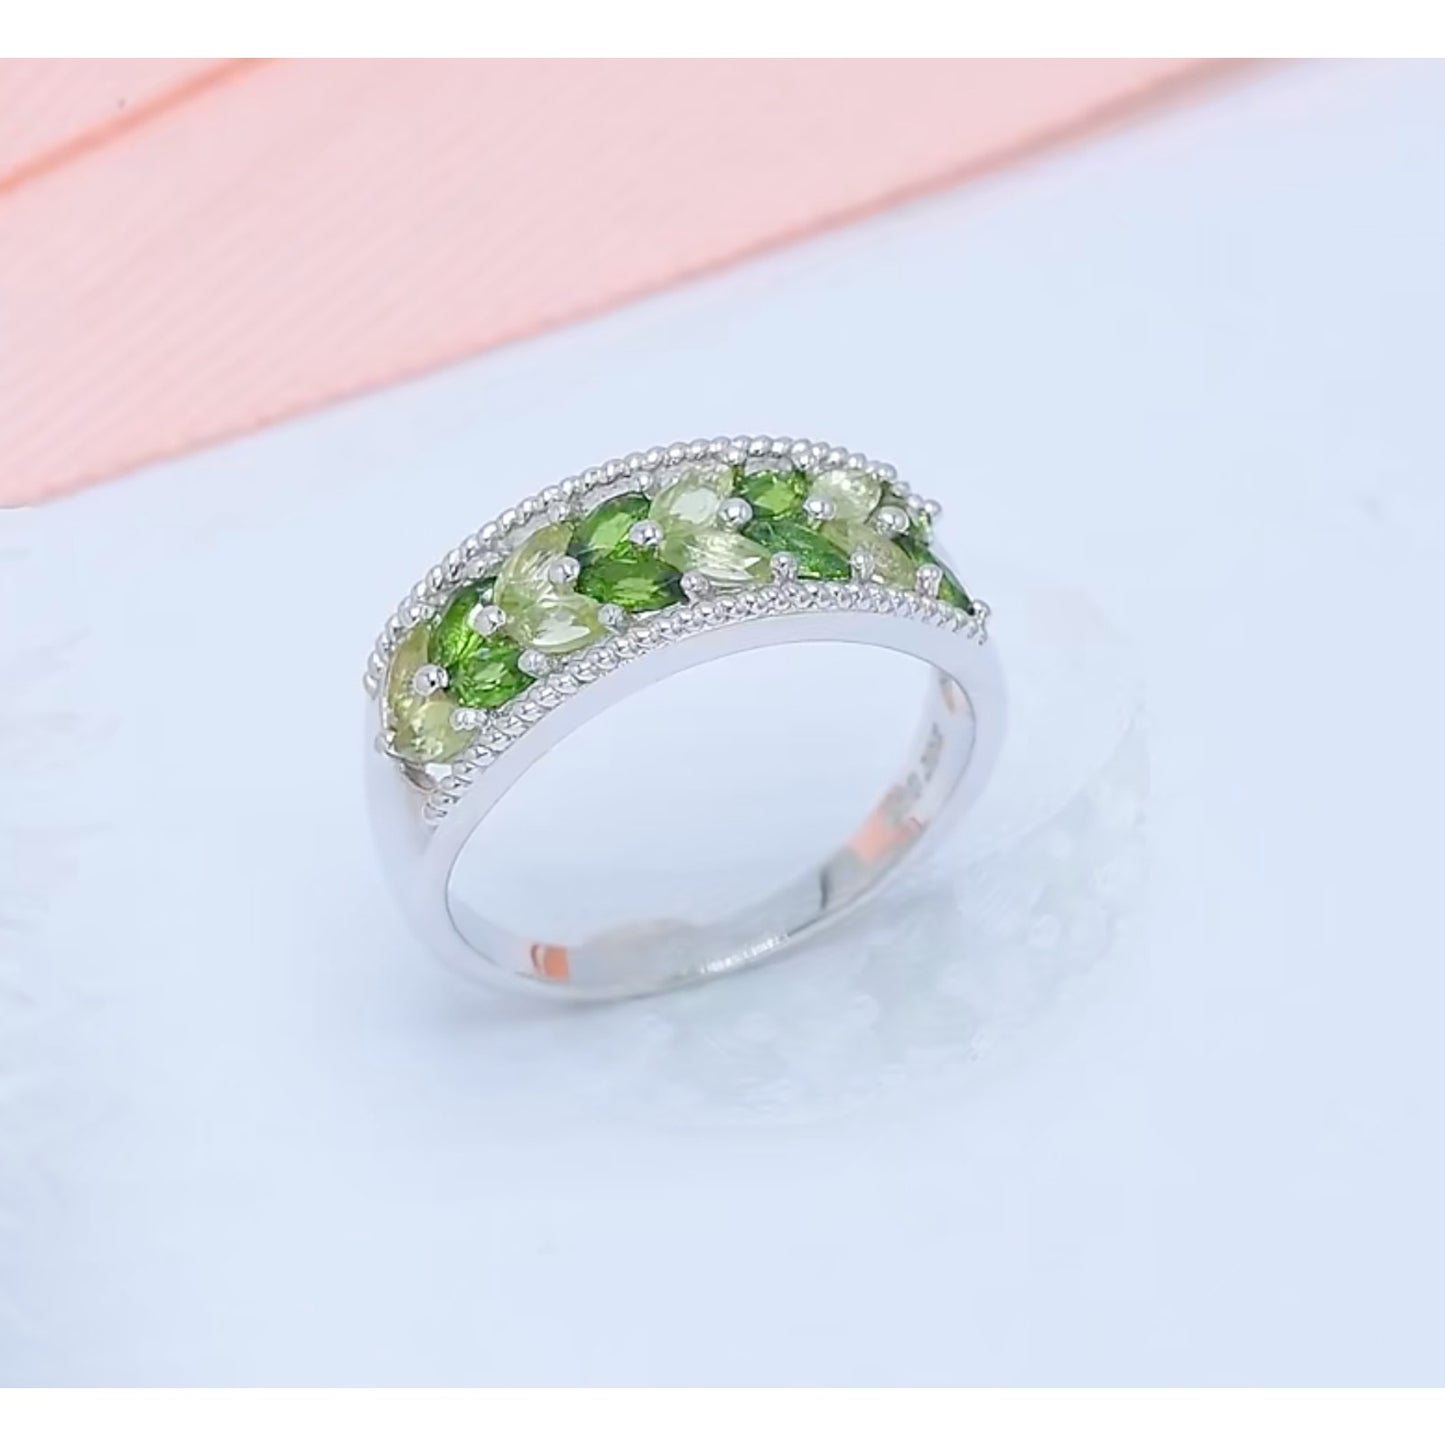 Peridot and Diopside Marquise Cut Band Ring, Green Gemstone Ring Sterling Silver